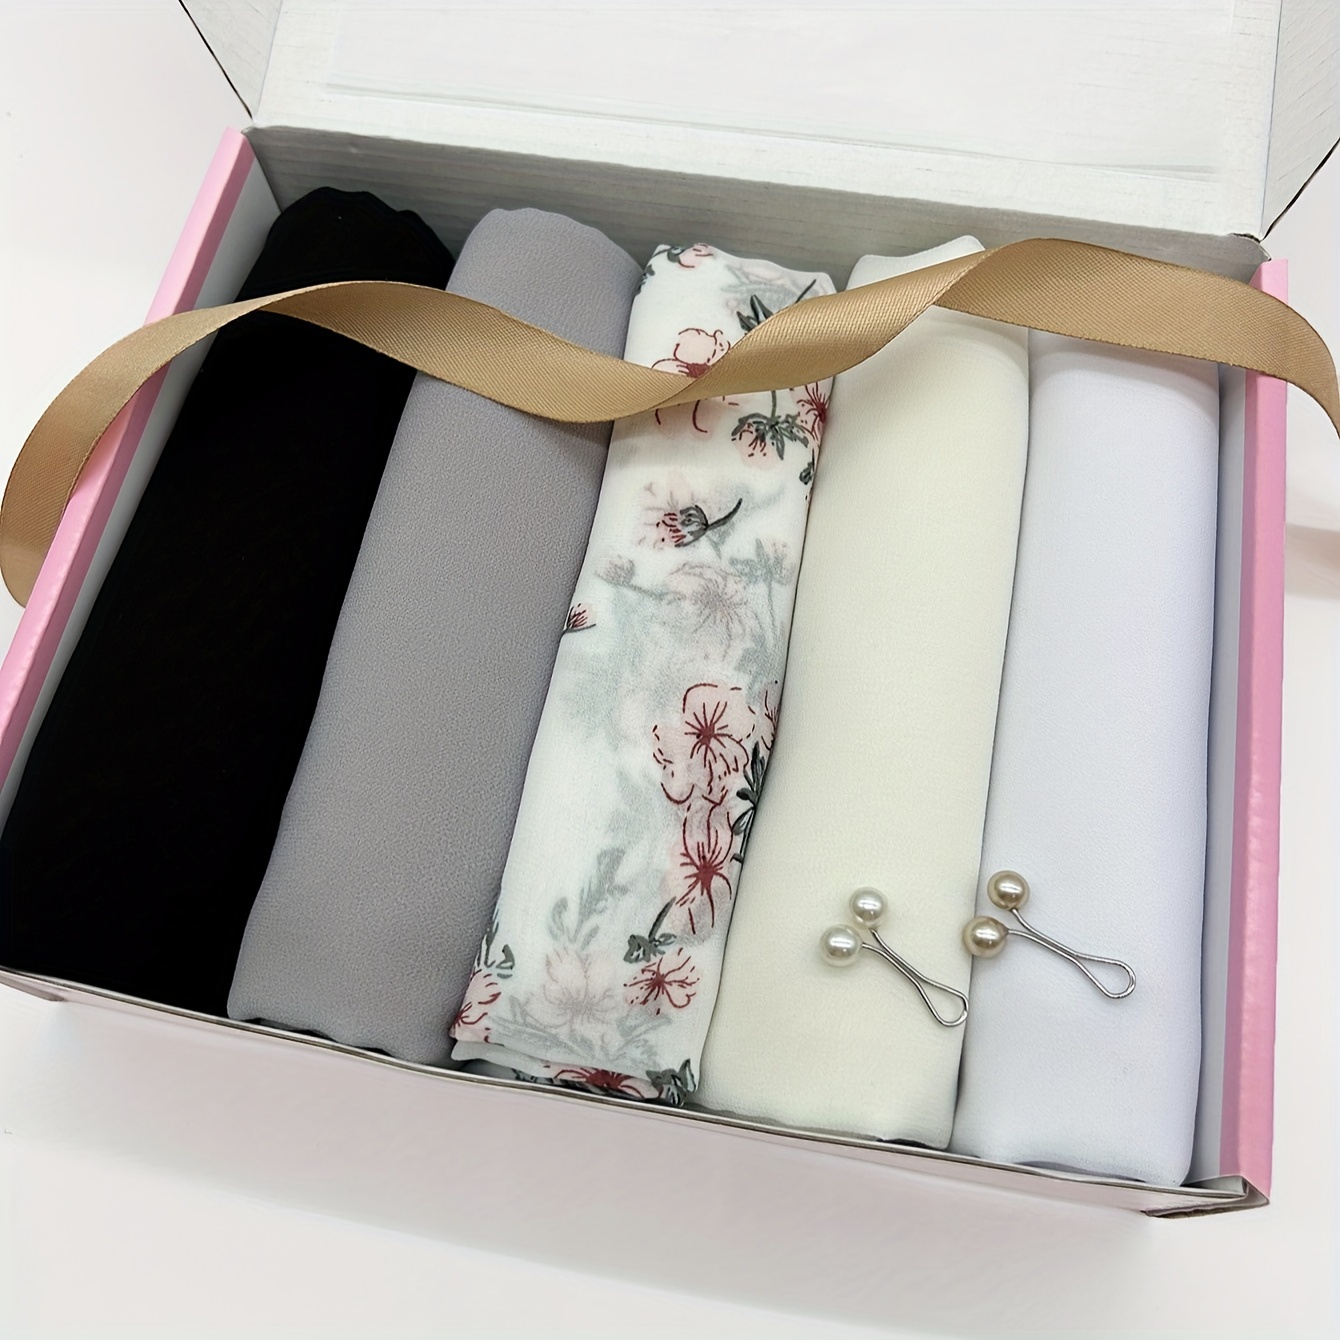 

5pcs Chiffon Solid & Printed Hijabs With Gift Box, Includes 2pcs Hijab Pins, Basic Style Muslim Scarves Clips Combination For Women, Mother's Day Gift Gifts For Eid